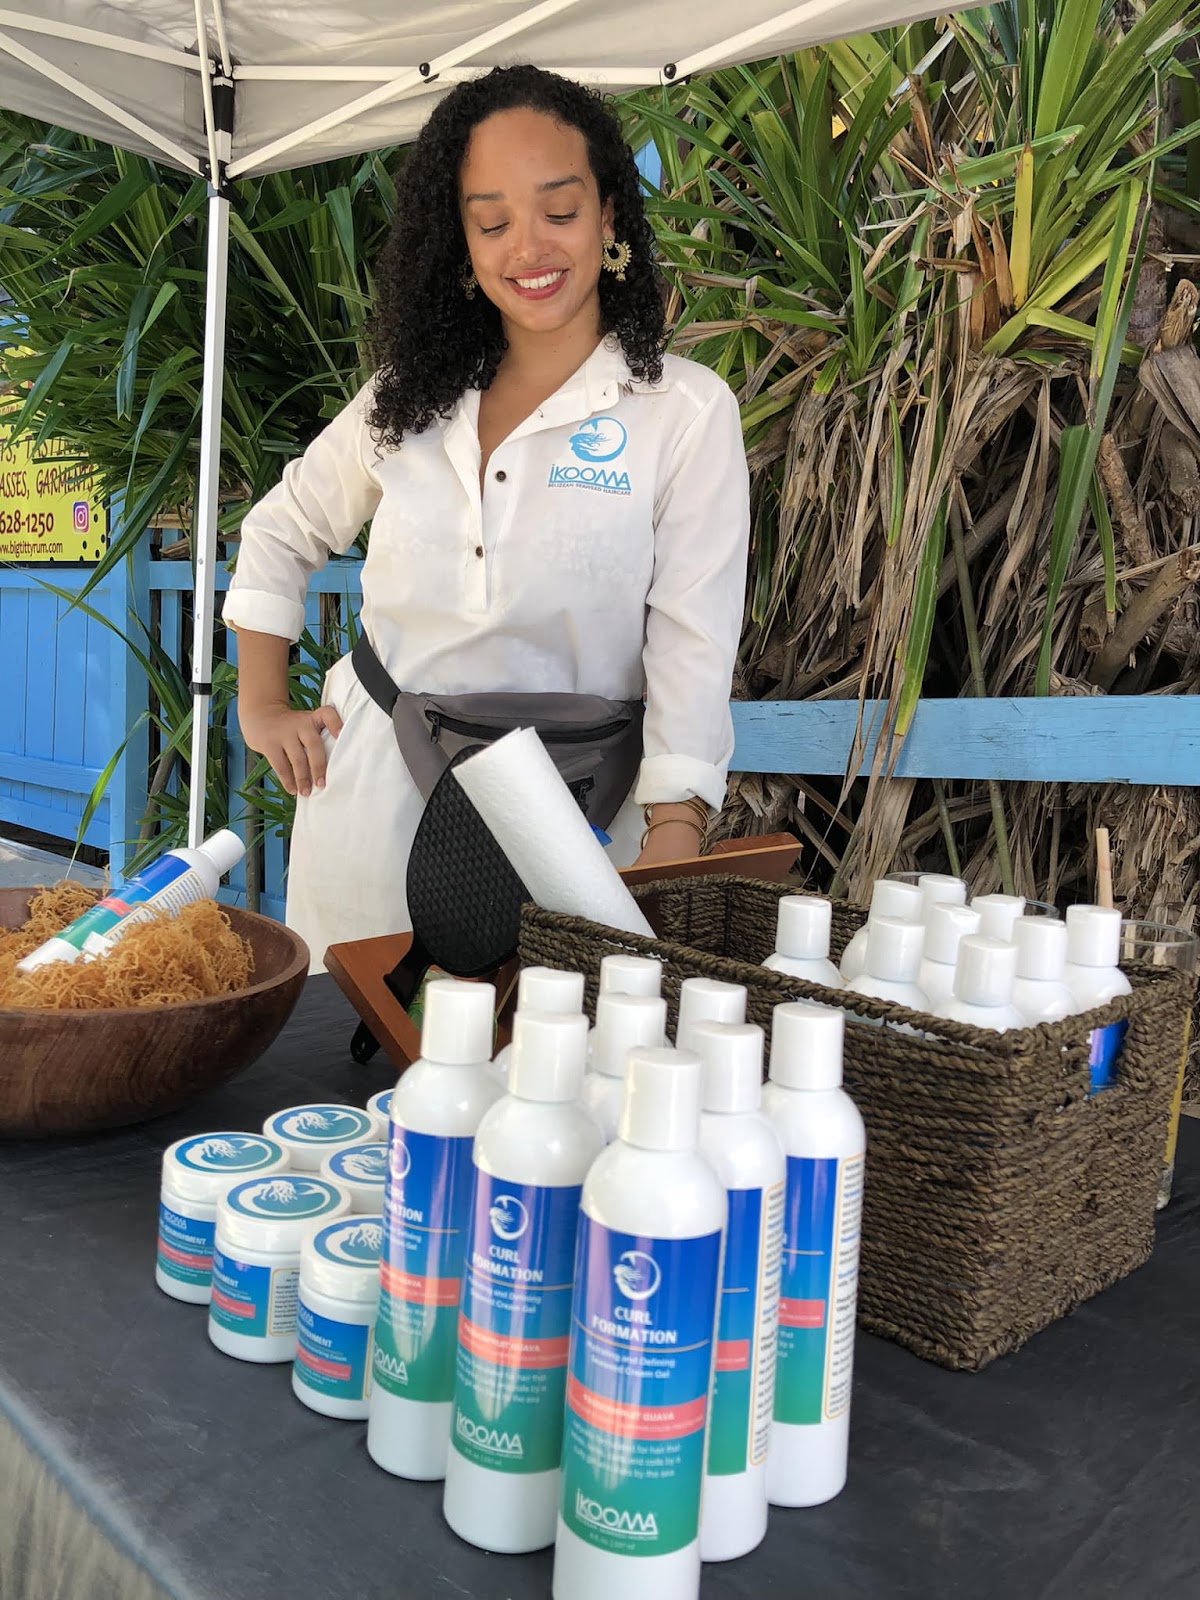 Belizean local organic hair care products made with seaweed